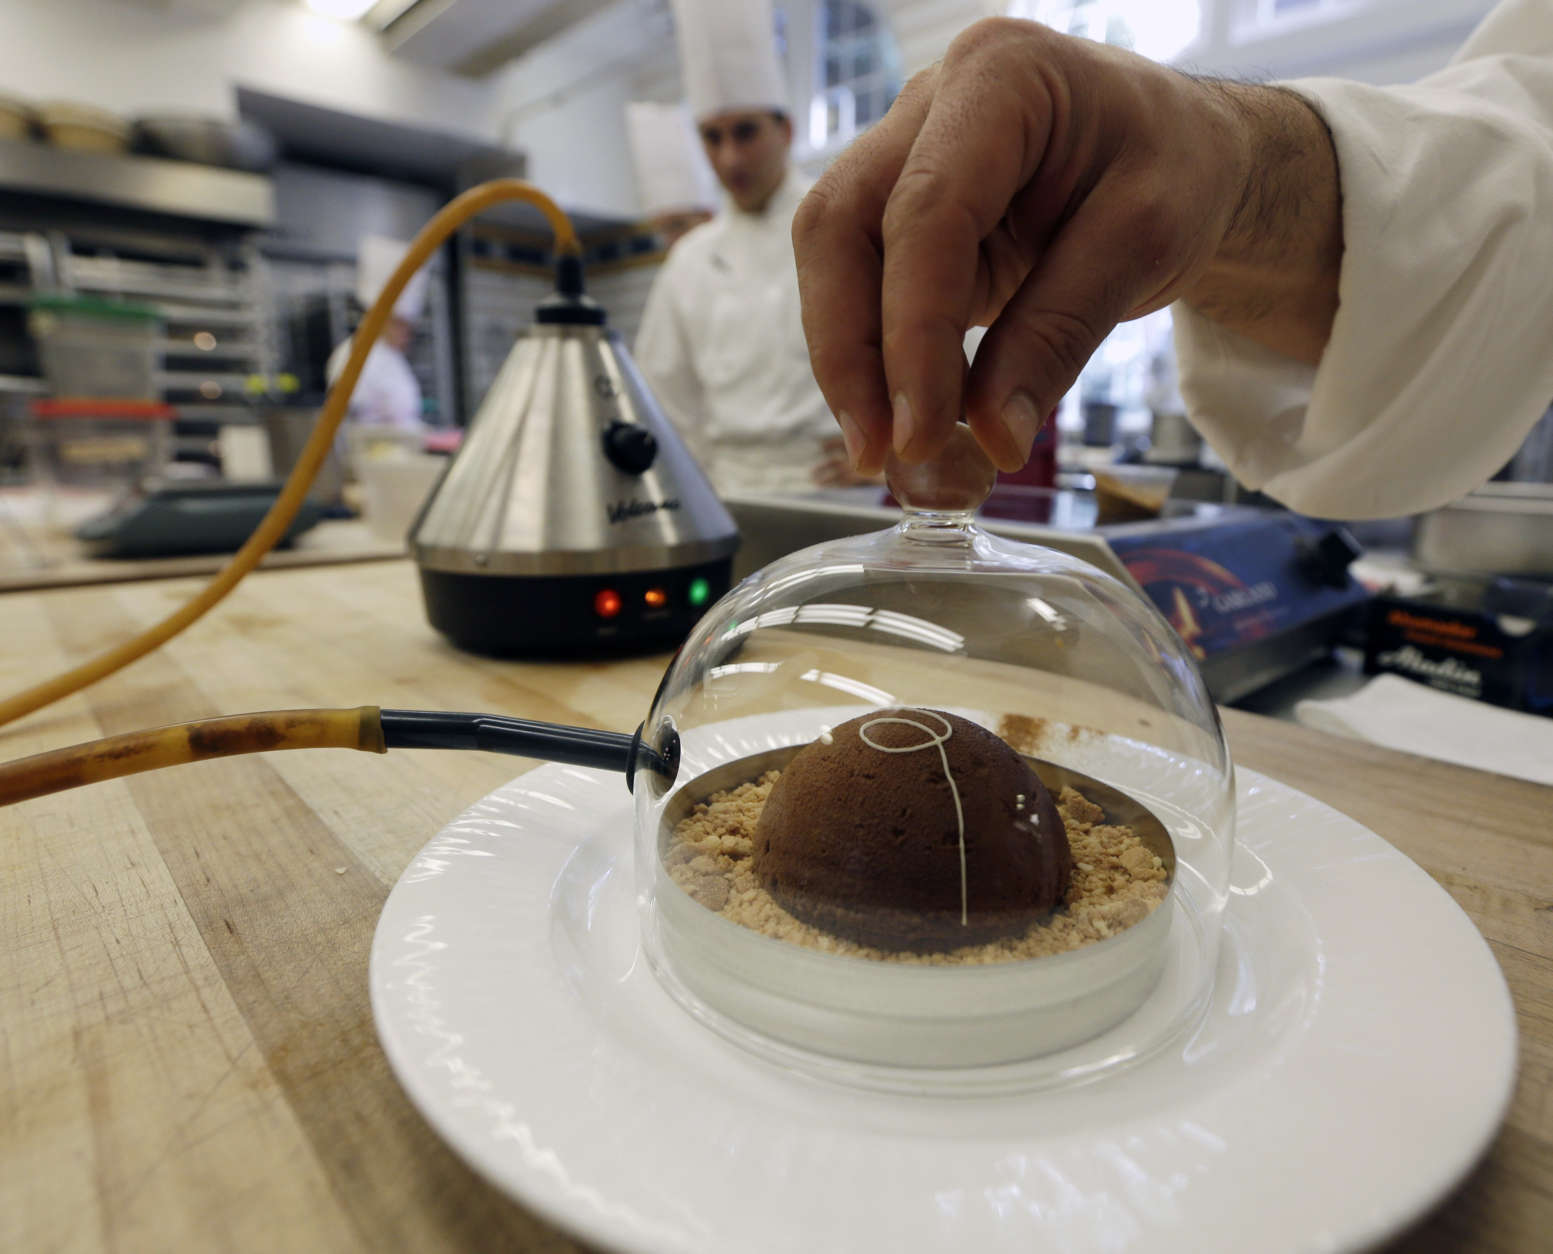 In this image taken on Friday, Sept. 14, 2012, cinnamon aroma is added to a peanut butter and milk chocolate dome dessert at the Culinary Institute of America in Hyde Park, N.Y. This esteemed cooking school north of New York City is dramatically pumping up science instruction, saying that tomorrow's chefs will need more technical know-how in the age of molecular gastronomy and sous-vide. (AP Photo/Mike Groll)